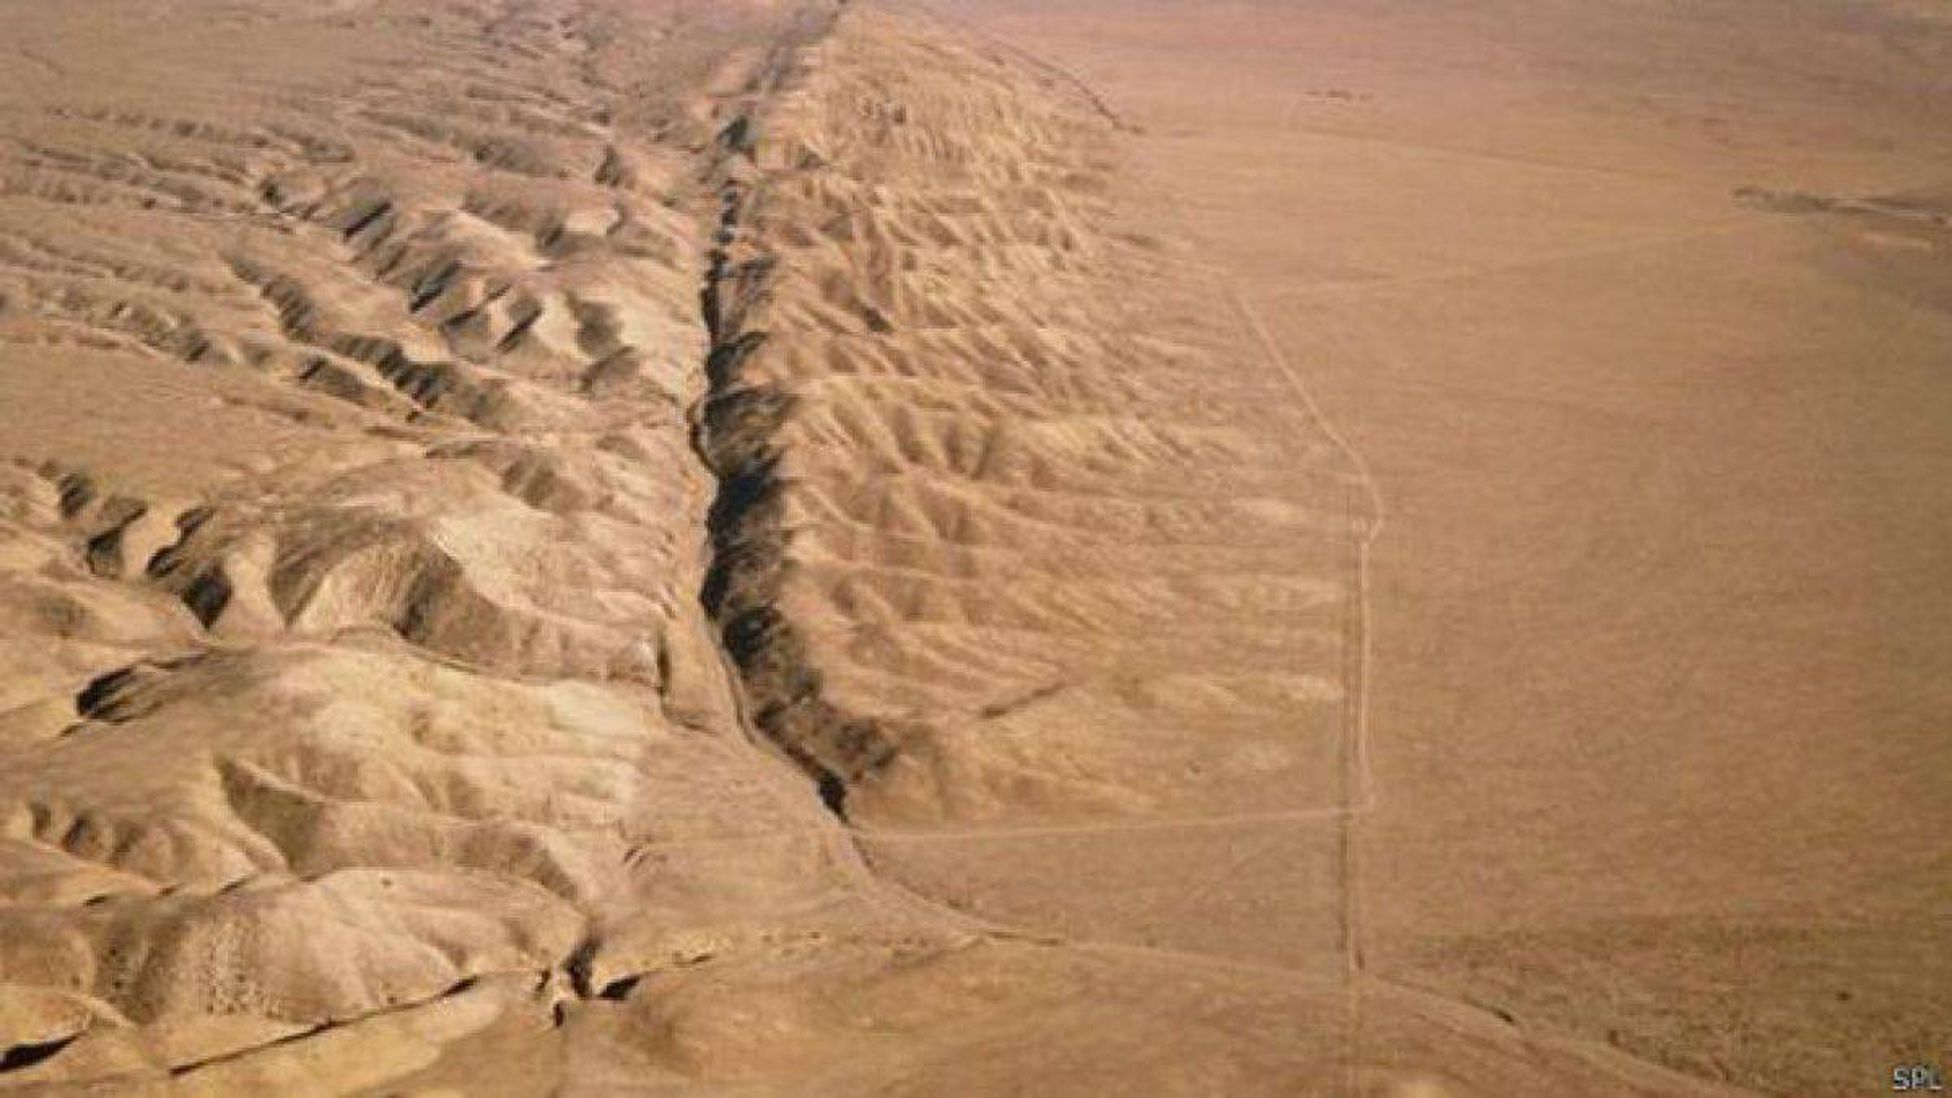 Records along the San Andreas fault were studied.